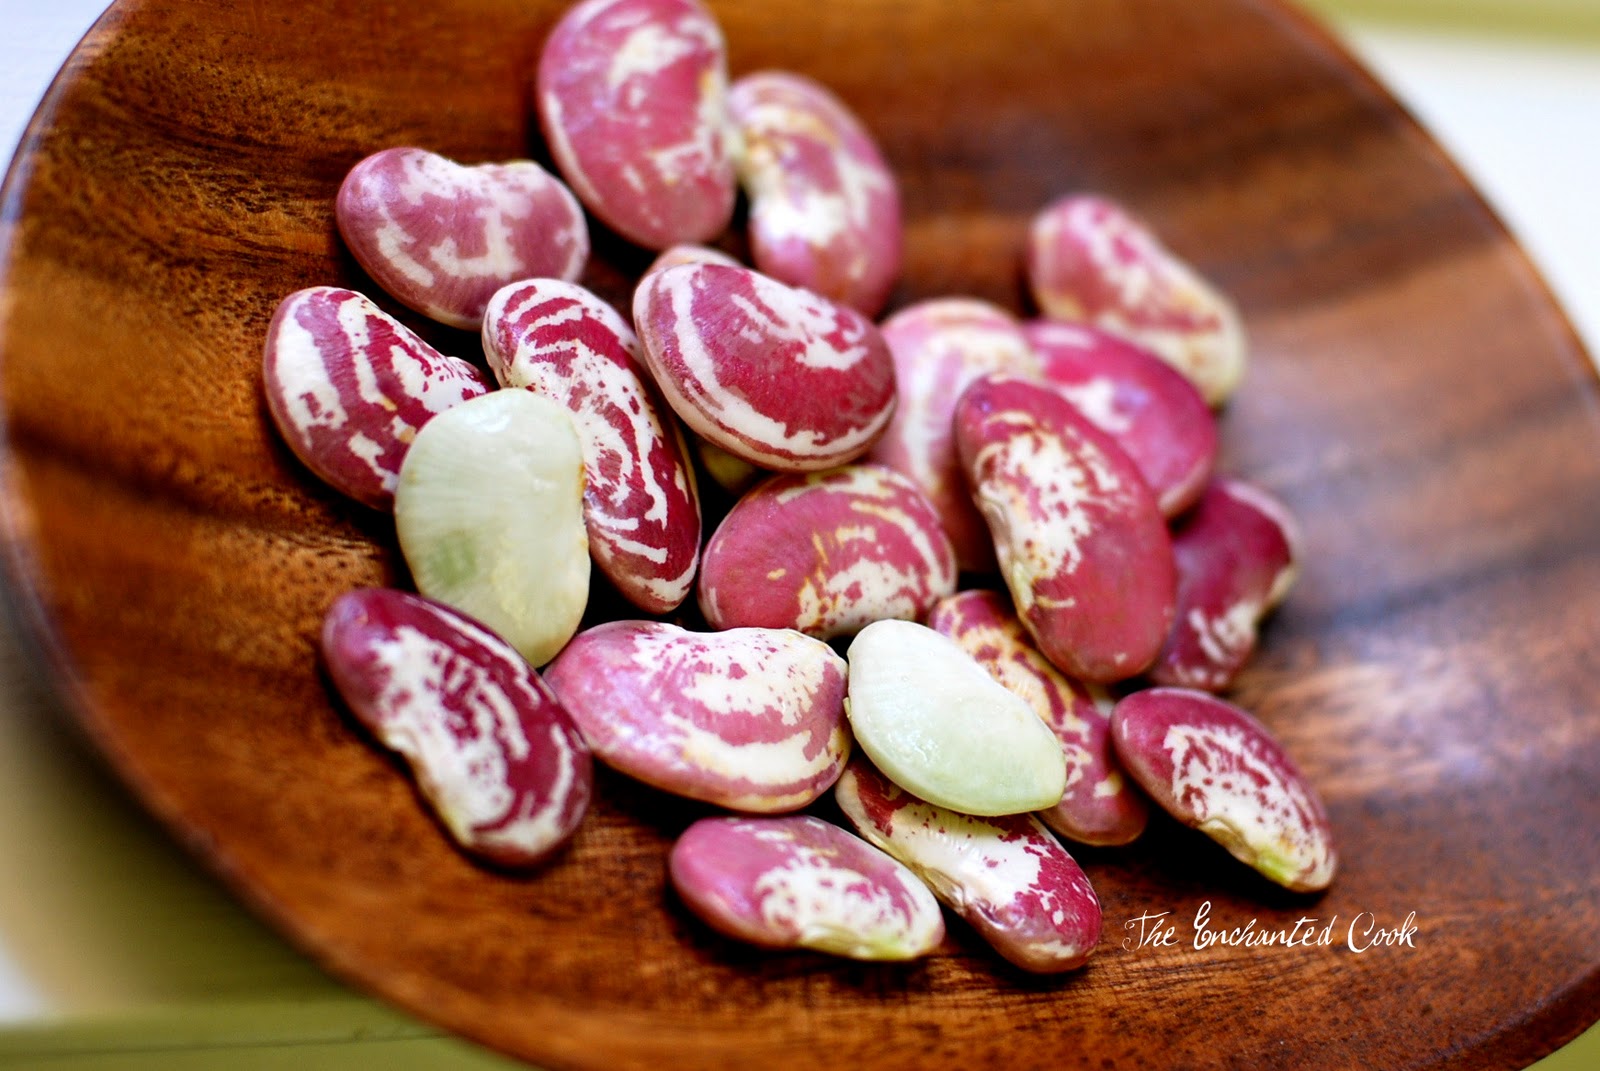 Food Lima Beans HD Wallpaper | Background Image